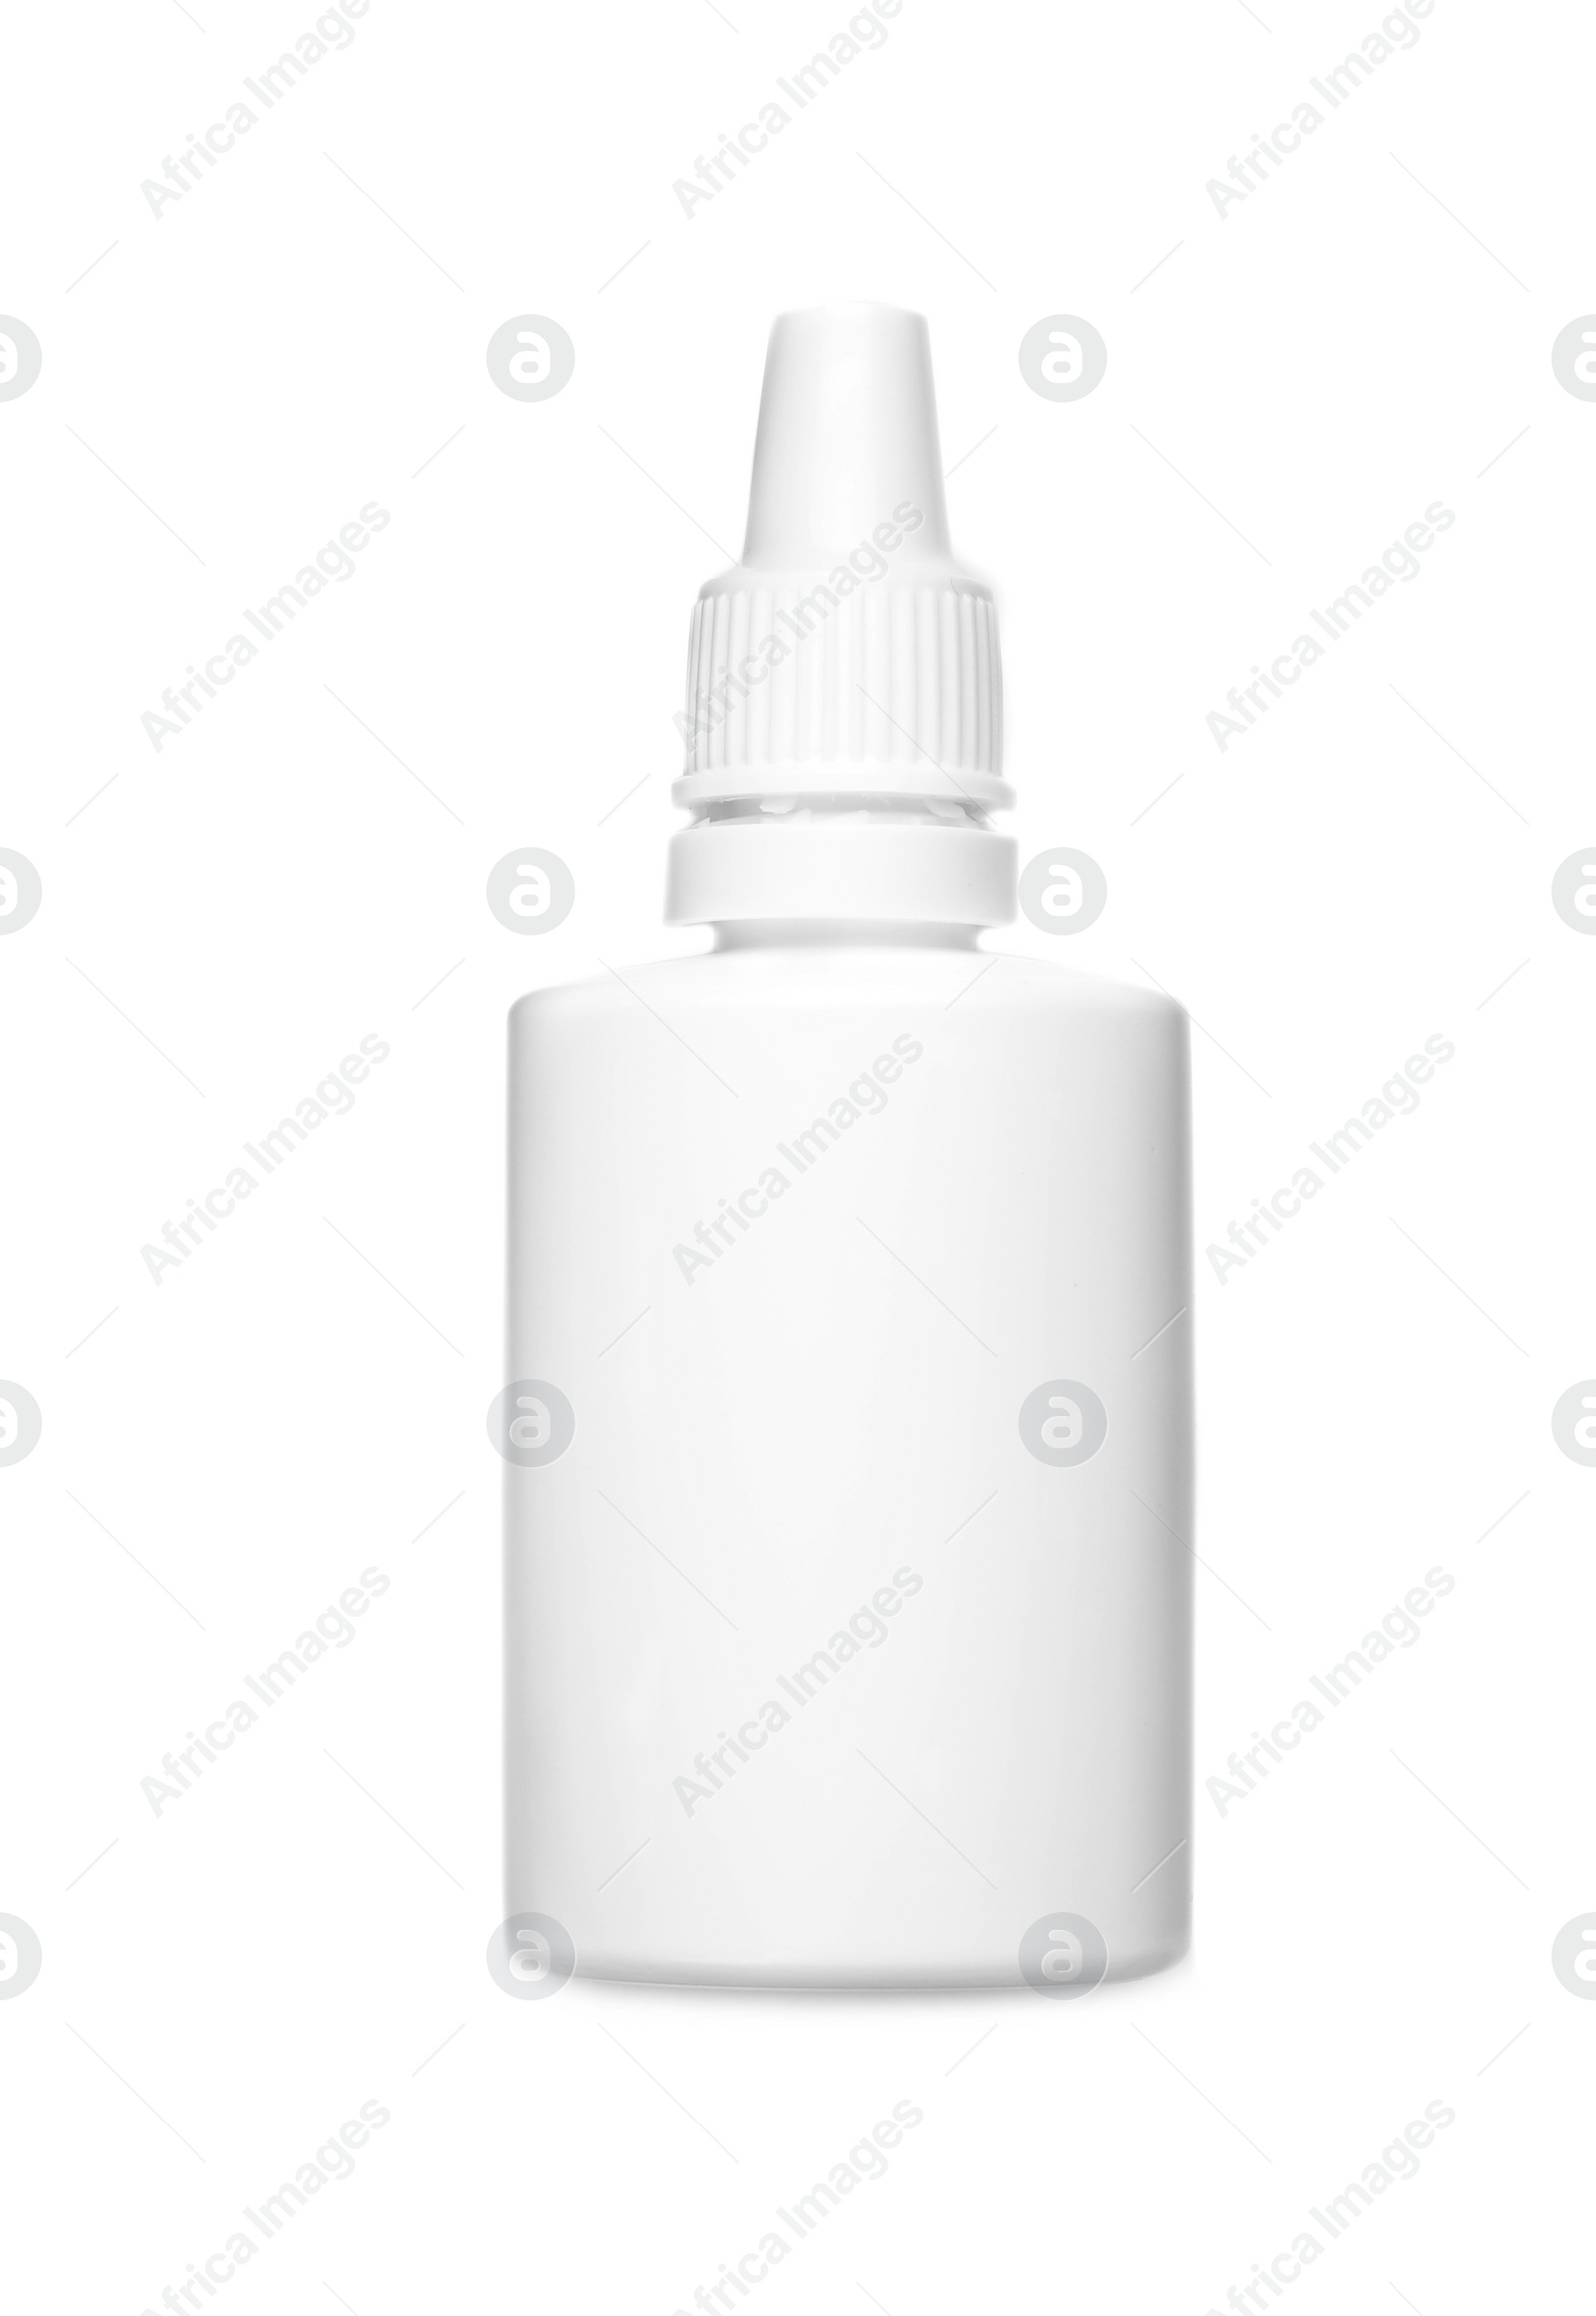 Photo of Plastic bottle with medicament on white background. Medical treatment